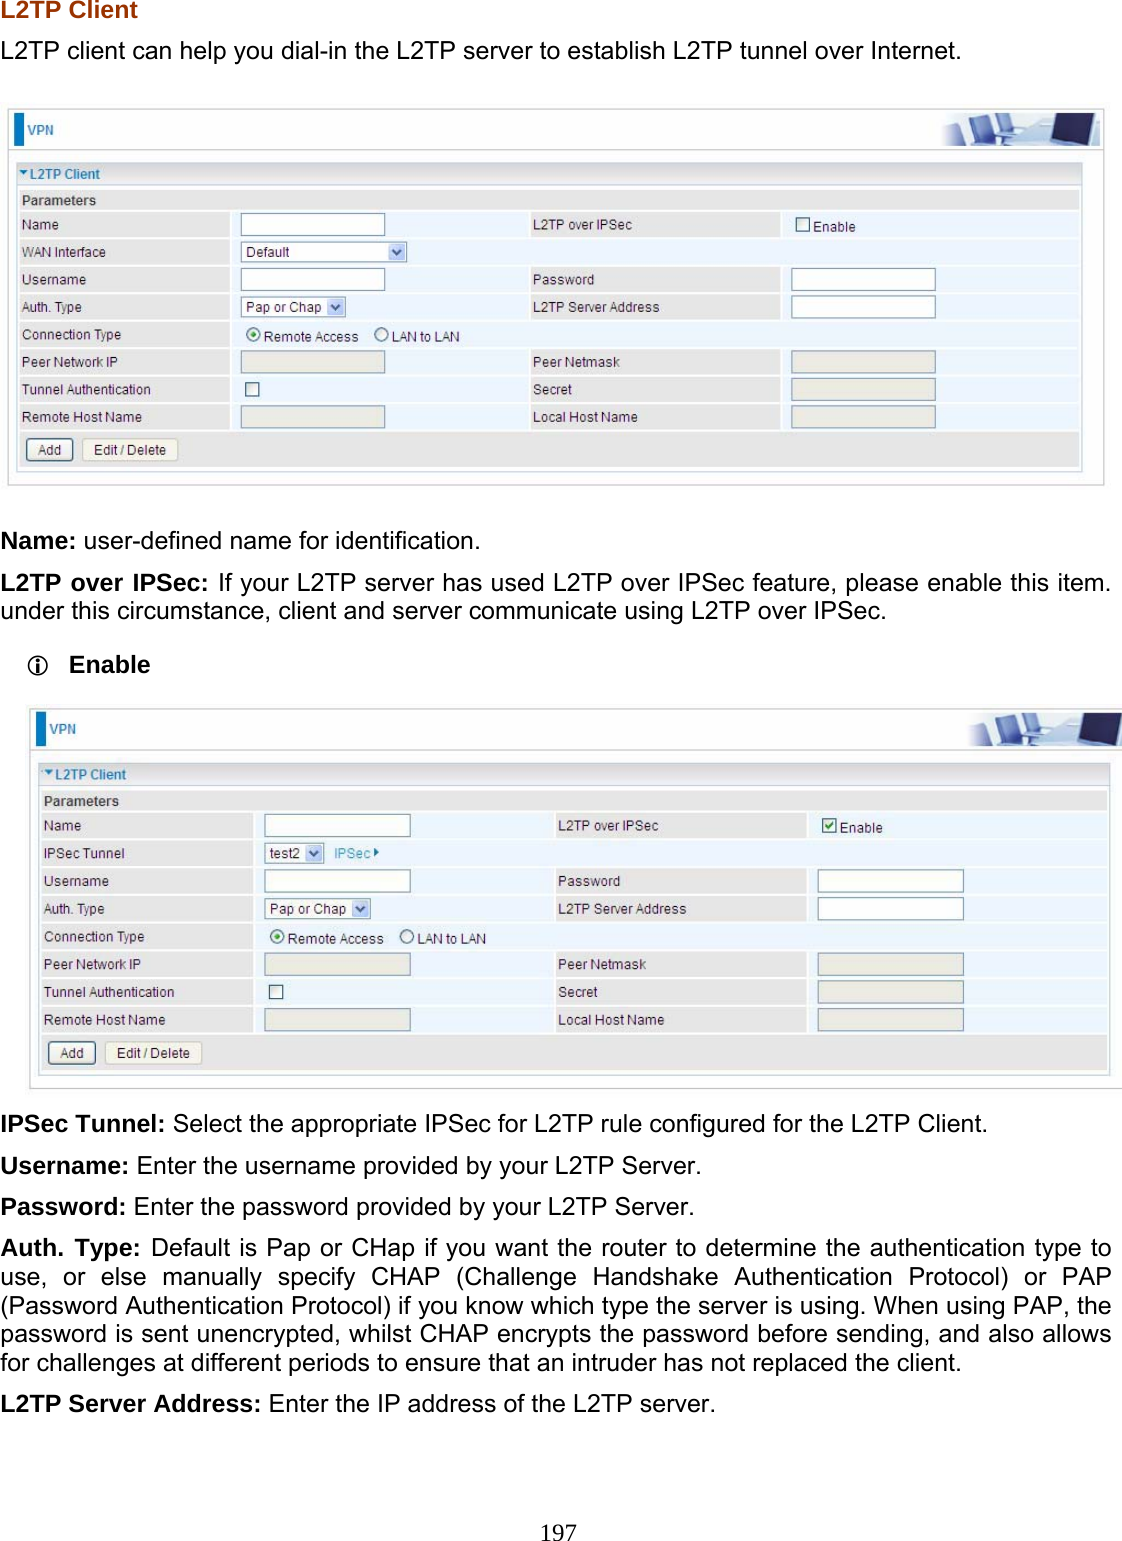 197 L2TP Client L2TP client can help you dial-in the L2TP server to establish L2TP tunnel over Internet.  Name: user-defined name for identification. L2TP over IPSec: If your L2TP server has used L2TP over IPSec feature, please enable this item. under this circumstance, client and server communicate using L2TP over IPSec.  Enable  IPSec Tunnel: Select the appropriate IPSec for L2TP rule configured for the L2TP Client.  Username: Enter the username provided by your L2TP Server. Password: Enter the password provided by your L2TP Server.  Auth. Type: Default is Pap or CHap if you want the router to determine the authentication type to use, or else manually specify CHAP (Challenge Handshake Authentication Protocol) or PAP (Password Authentication Protocol) if you know which type the server is using. When using PAP, the password is sent unencrypted, whilst CHAP encrypts the password before sending, and also allows for challenges at different periods to ensure that an intruder has not replaced the client. L2TP Server Address: Enter the IP address of the L2TP server. 